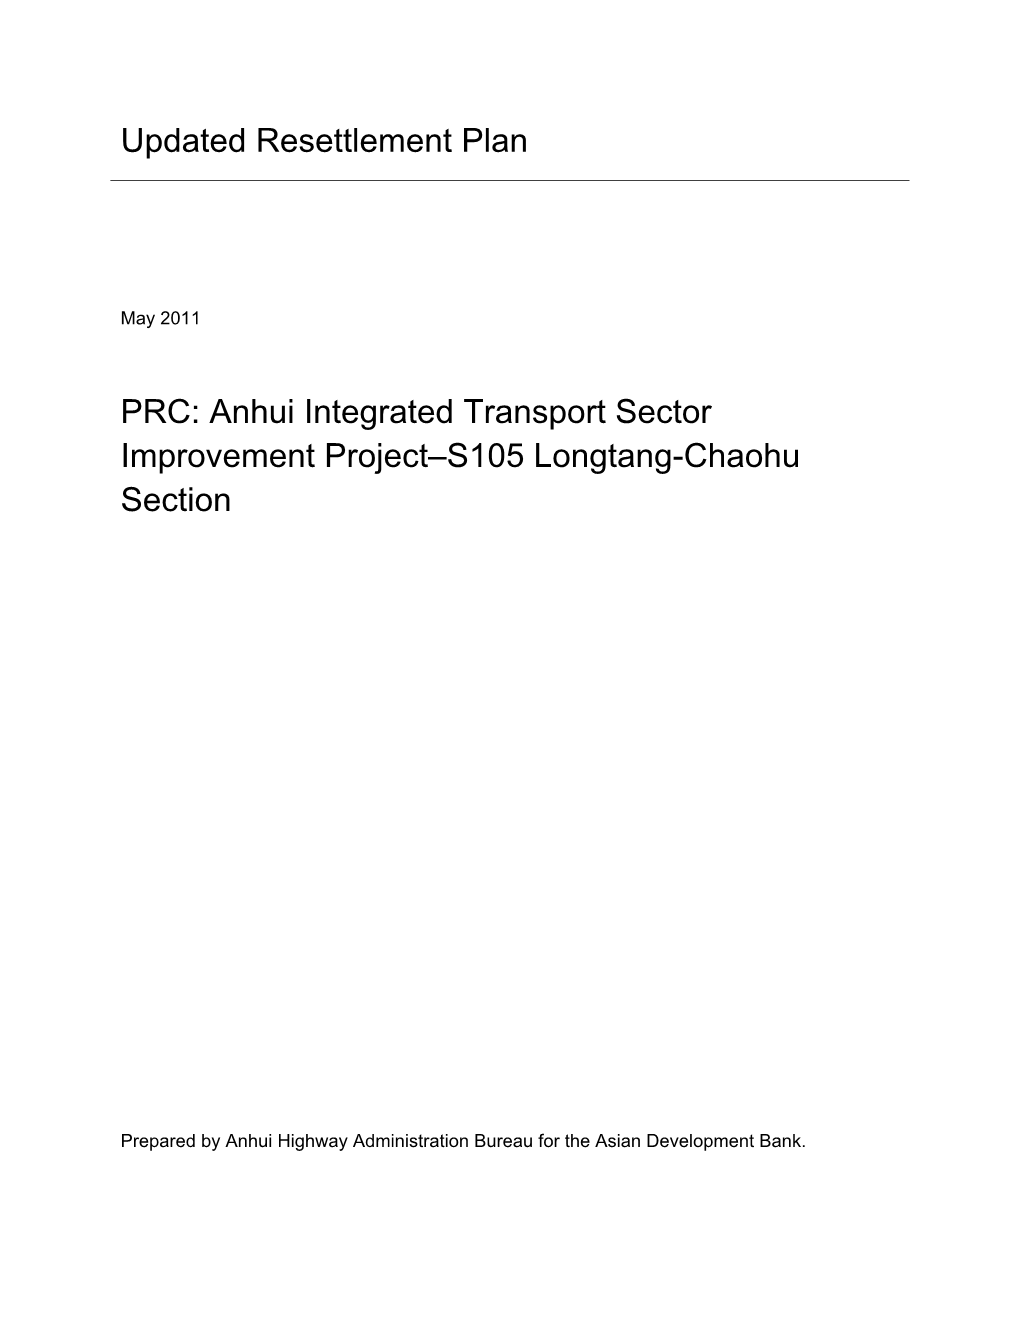 PRC: S105 Longtang-Chaohu Section, Anhui Integrated Transport Sector